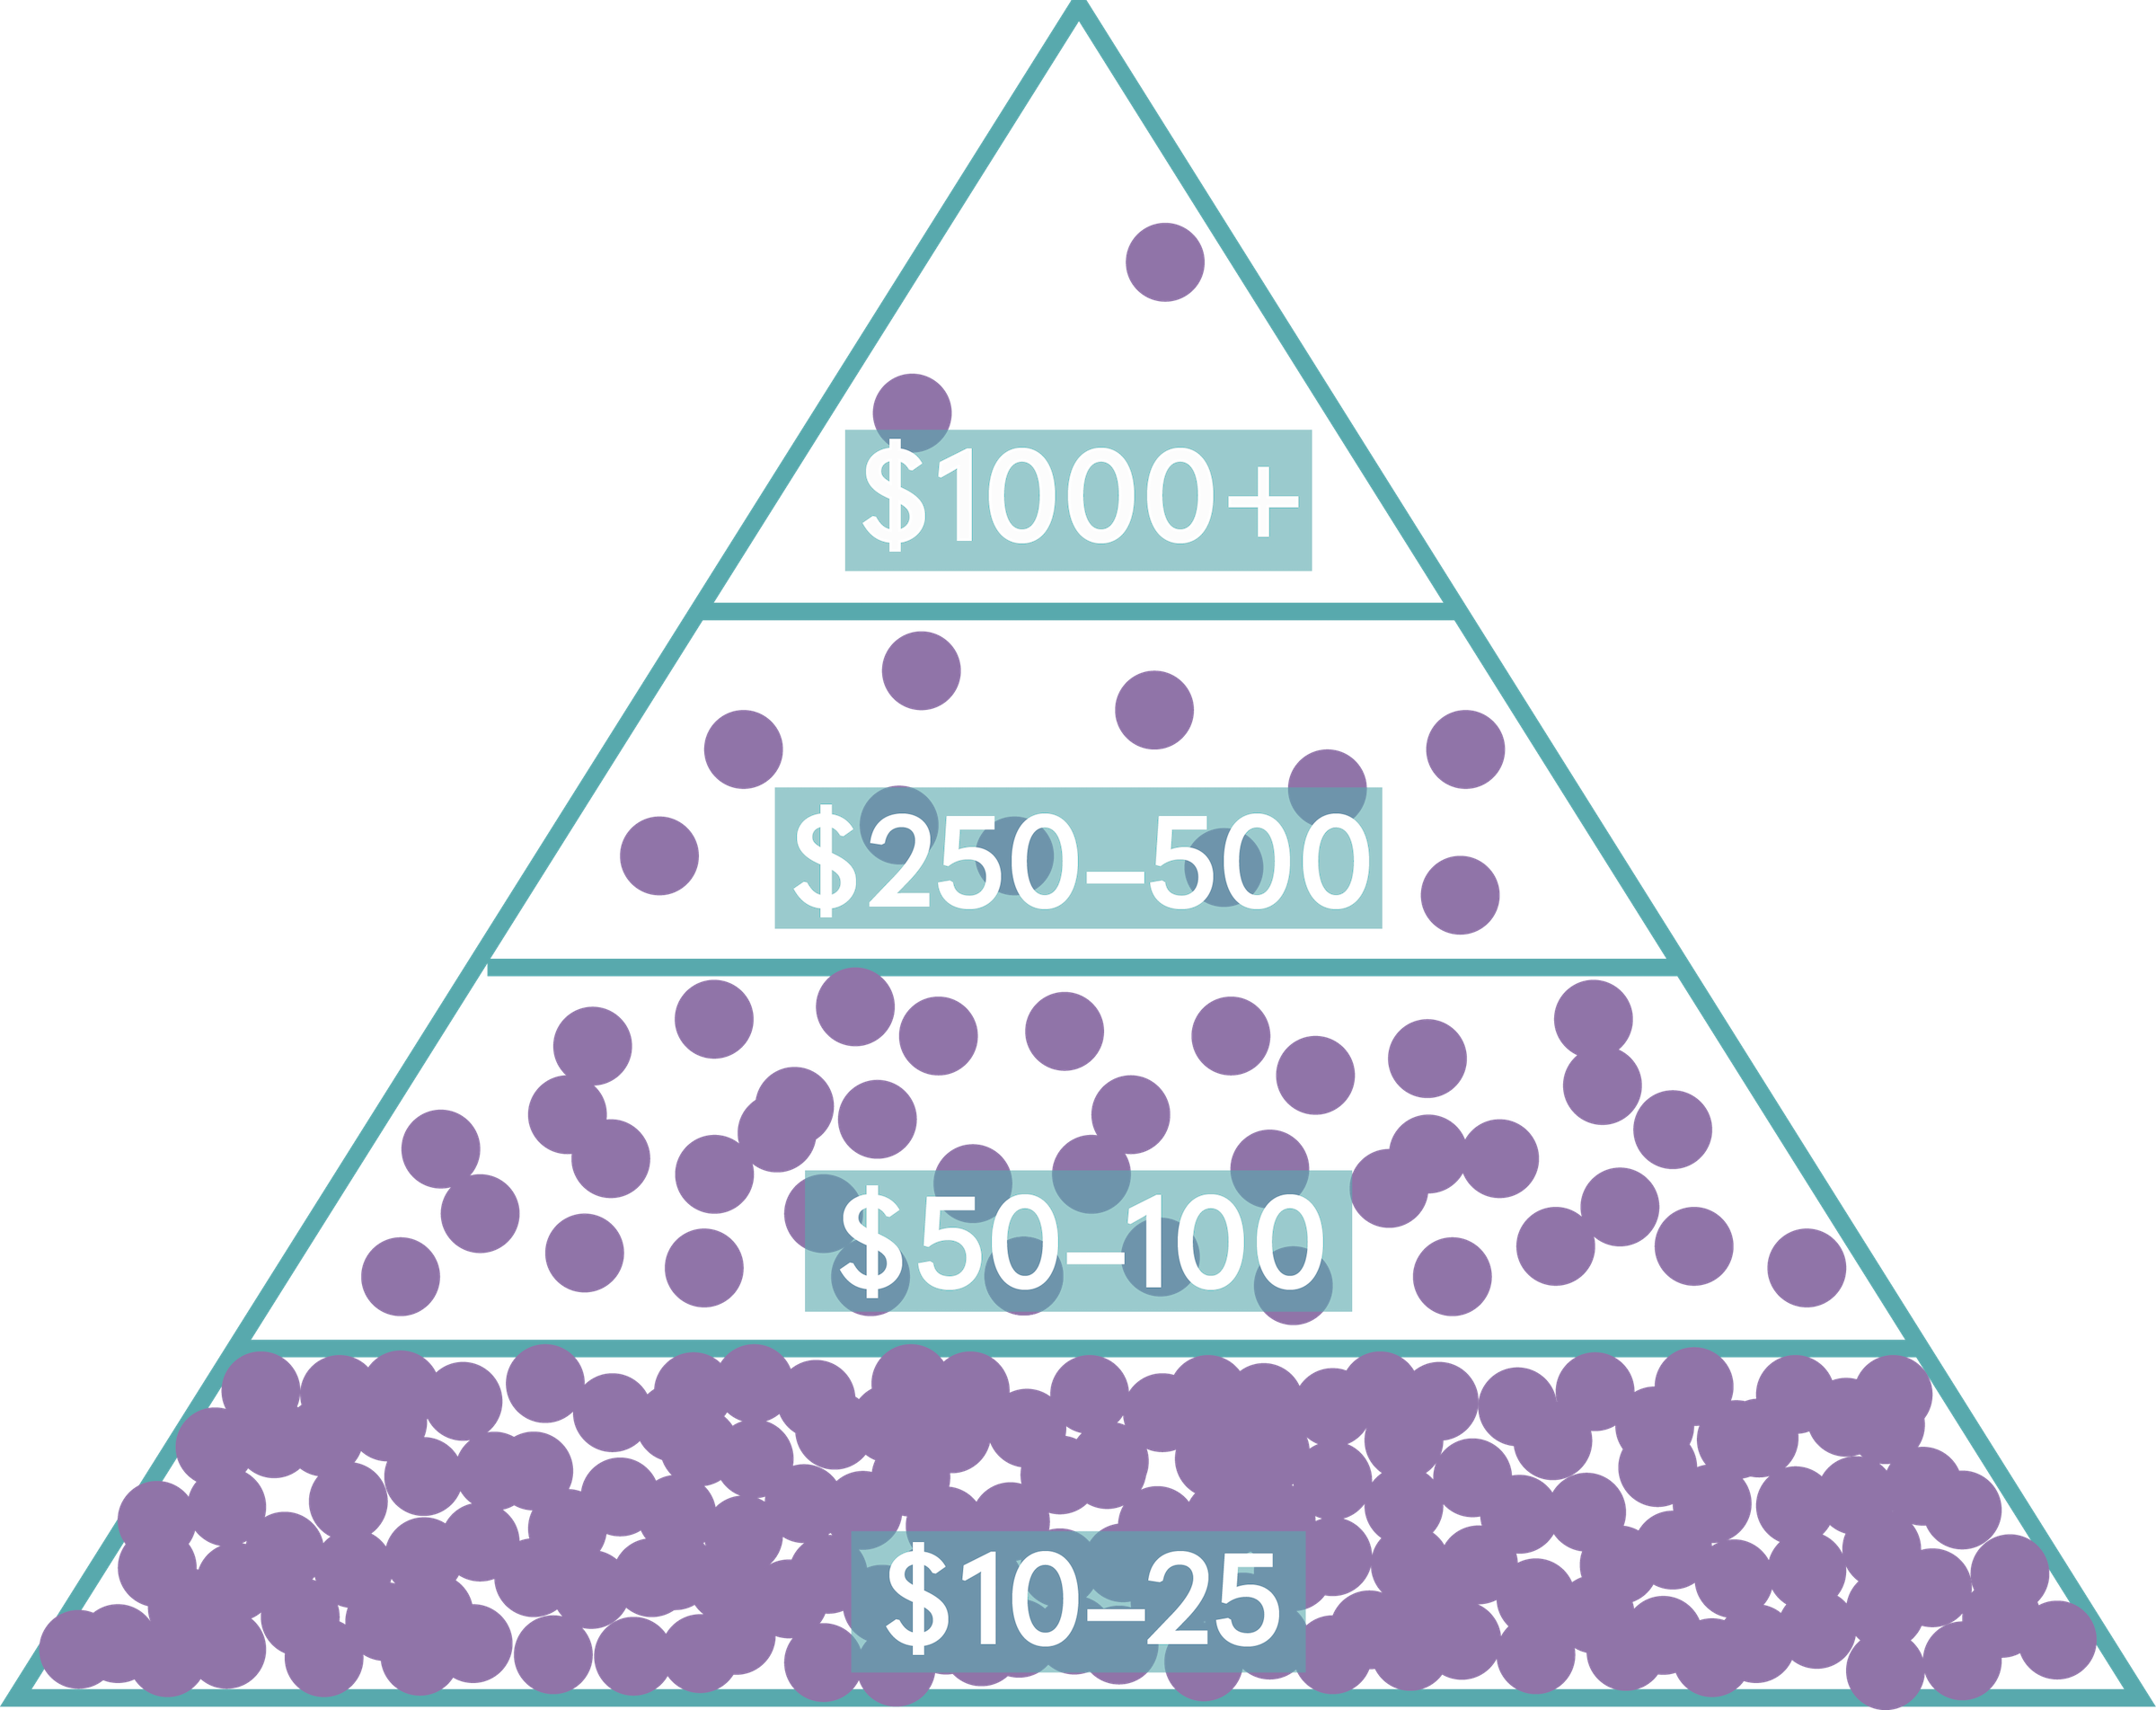 funding pyramid - how to successfully fund a kickstarter album campaign